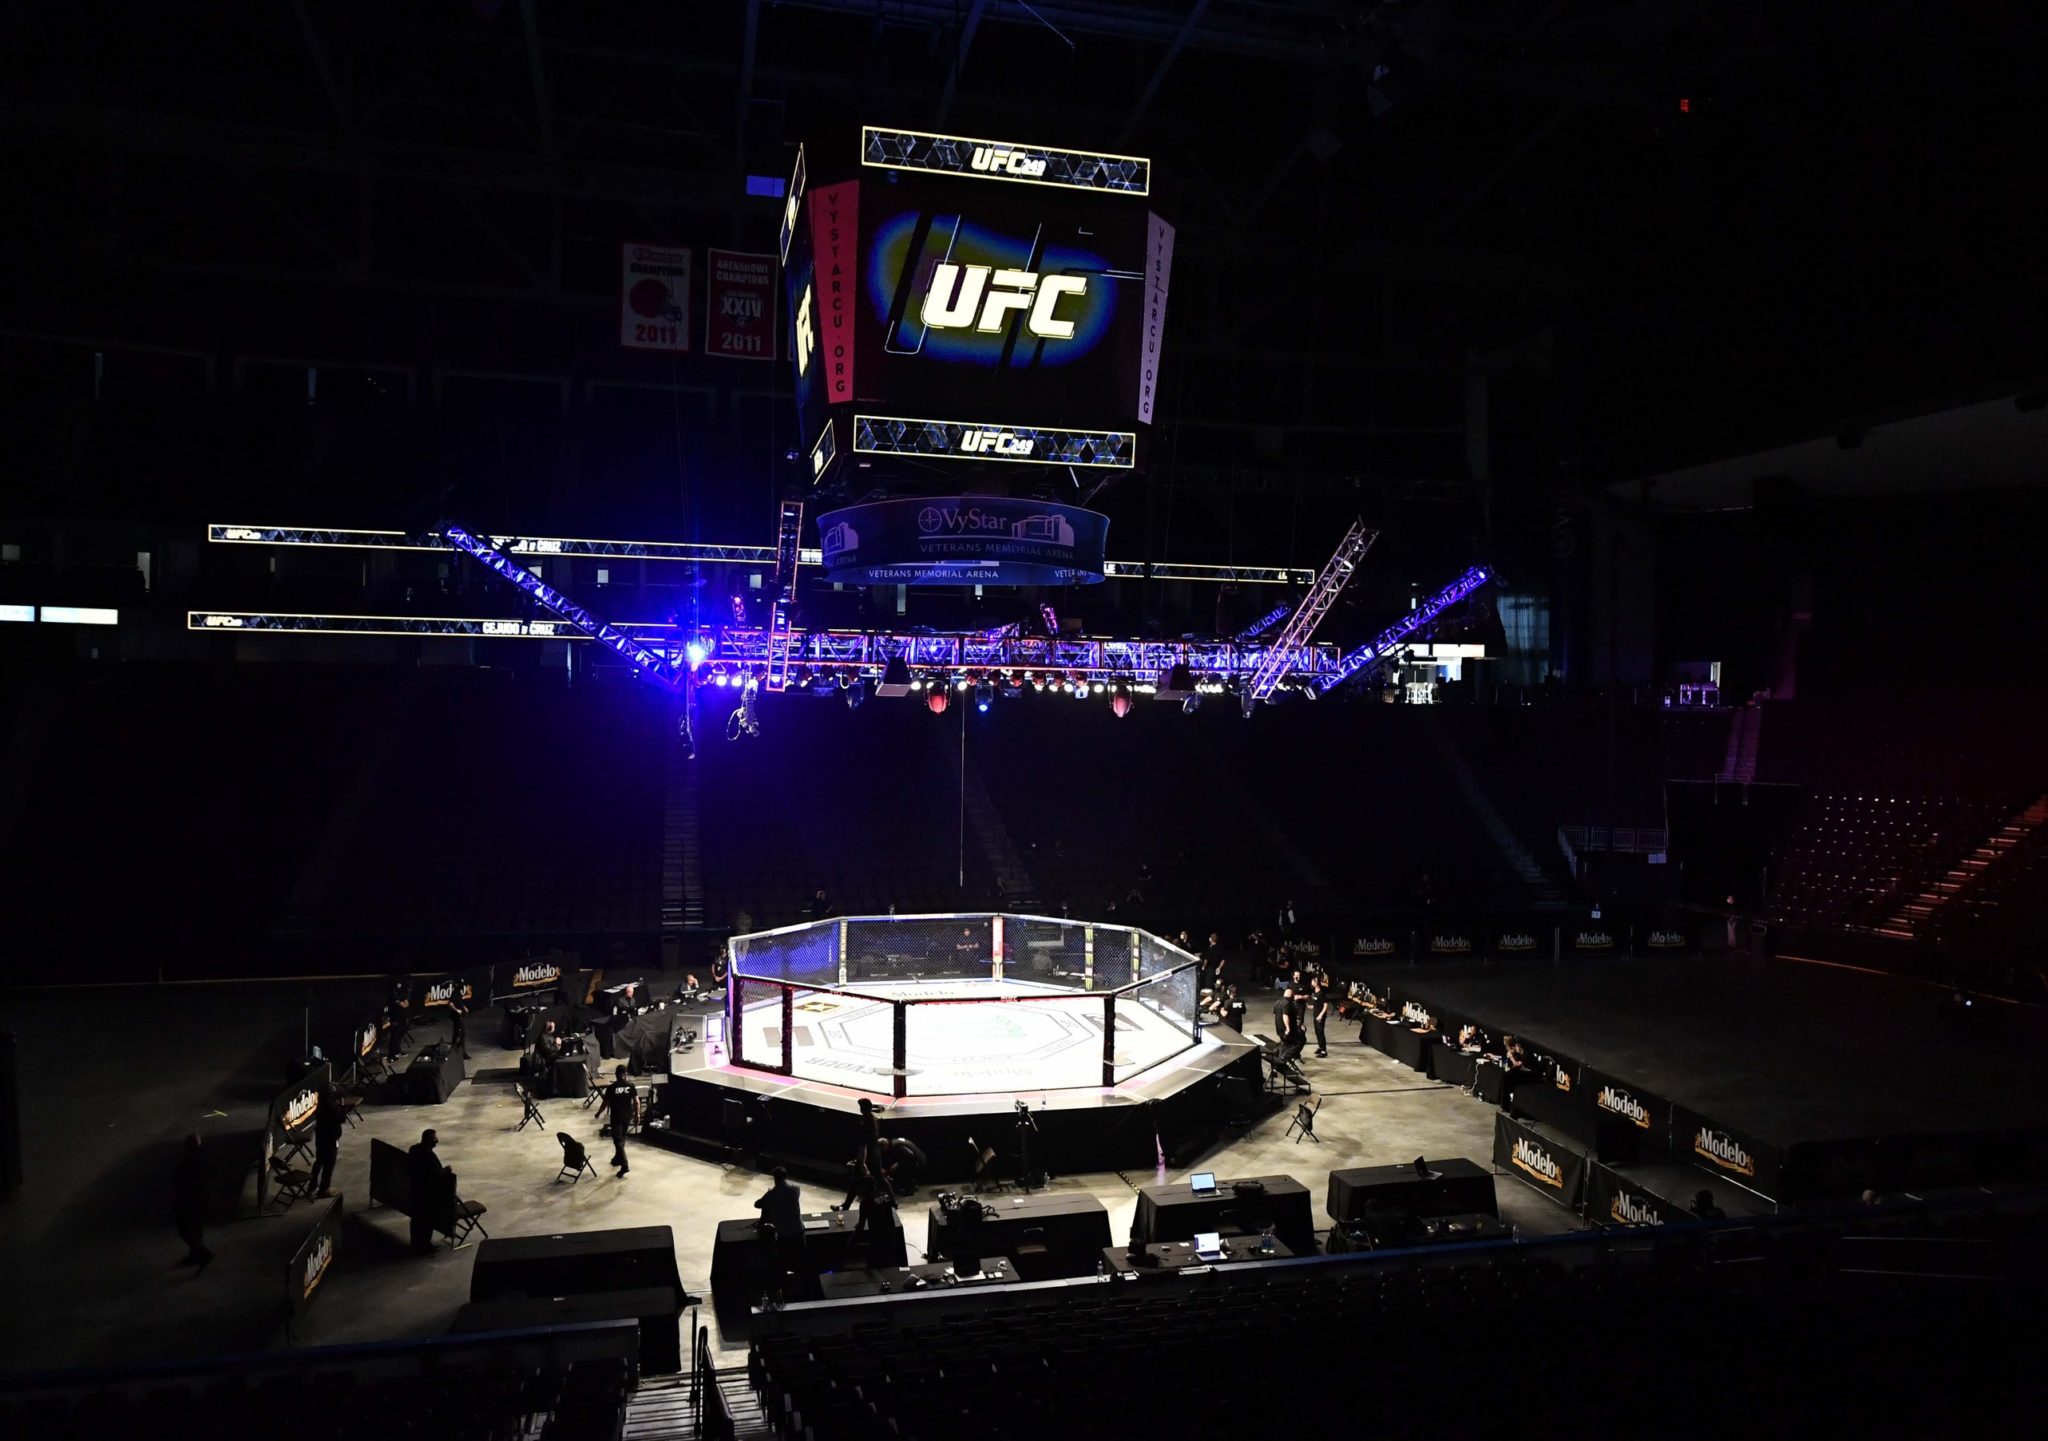 Three Things We Learned from UFC 249, and Can Apply to Restarting Team Sports